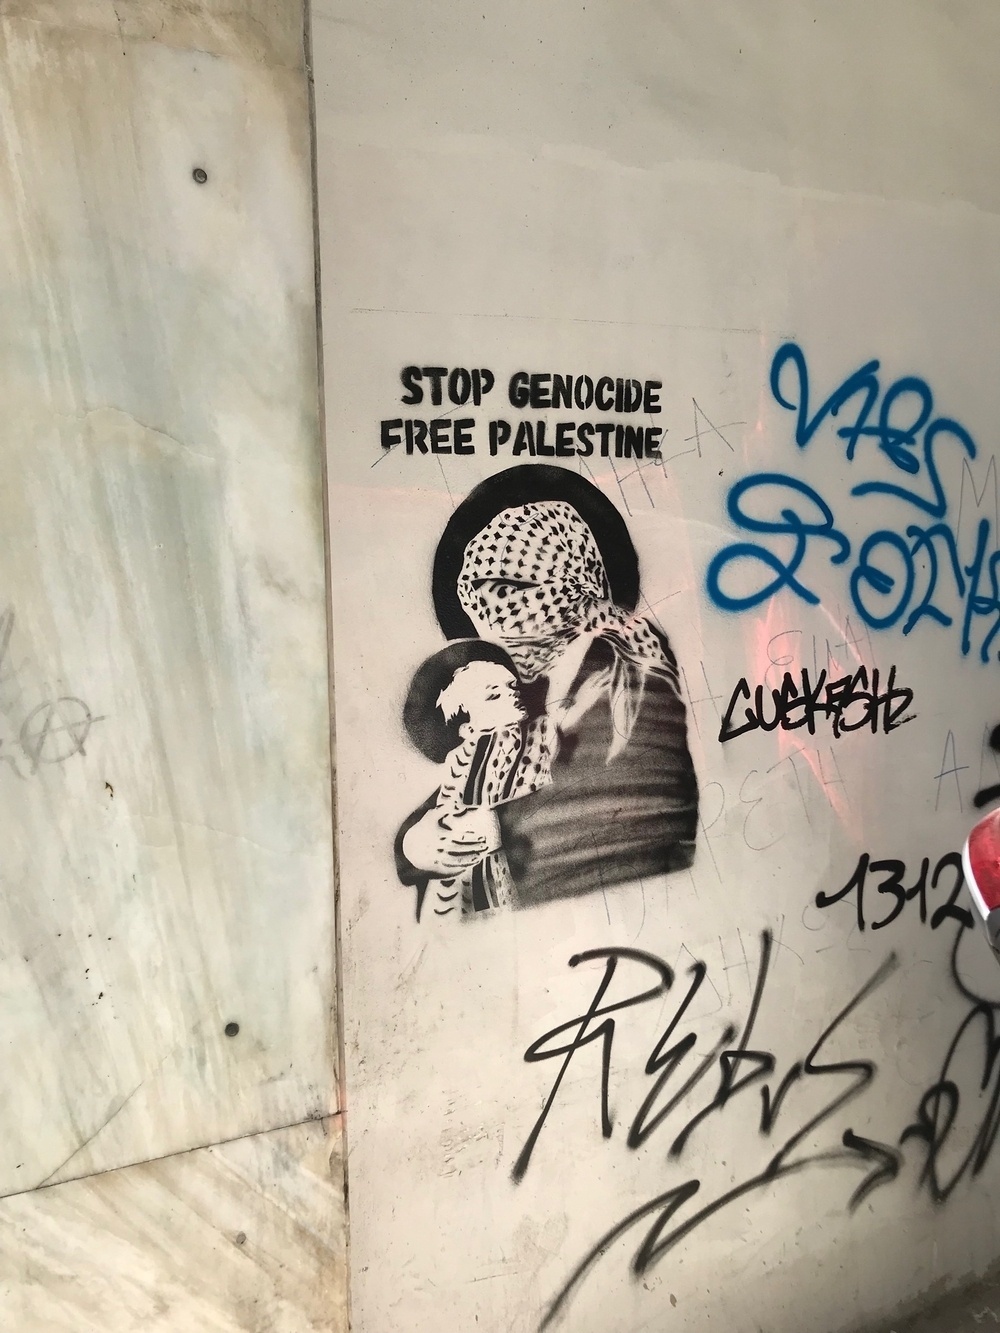 Graffiti in Athens with text reading "Stop Genocide, Free Palestine" above a stencil drawing of a person with their head and face completely wrapped in a keffiyeh, holding a child is wrapped in a keffiyeh. Both of their heads are haloed by a black circle